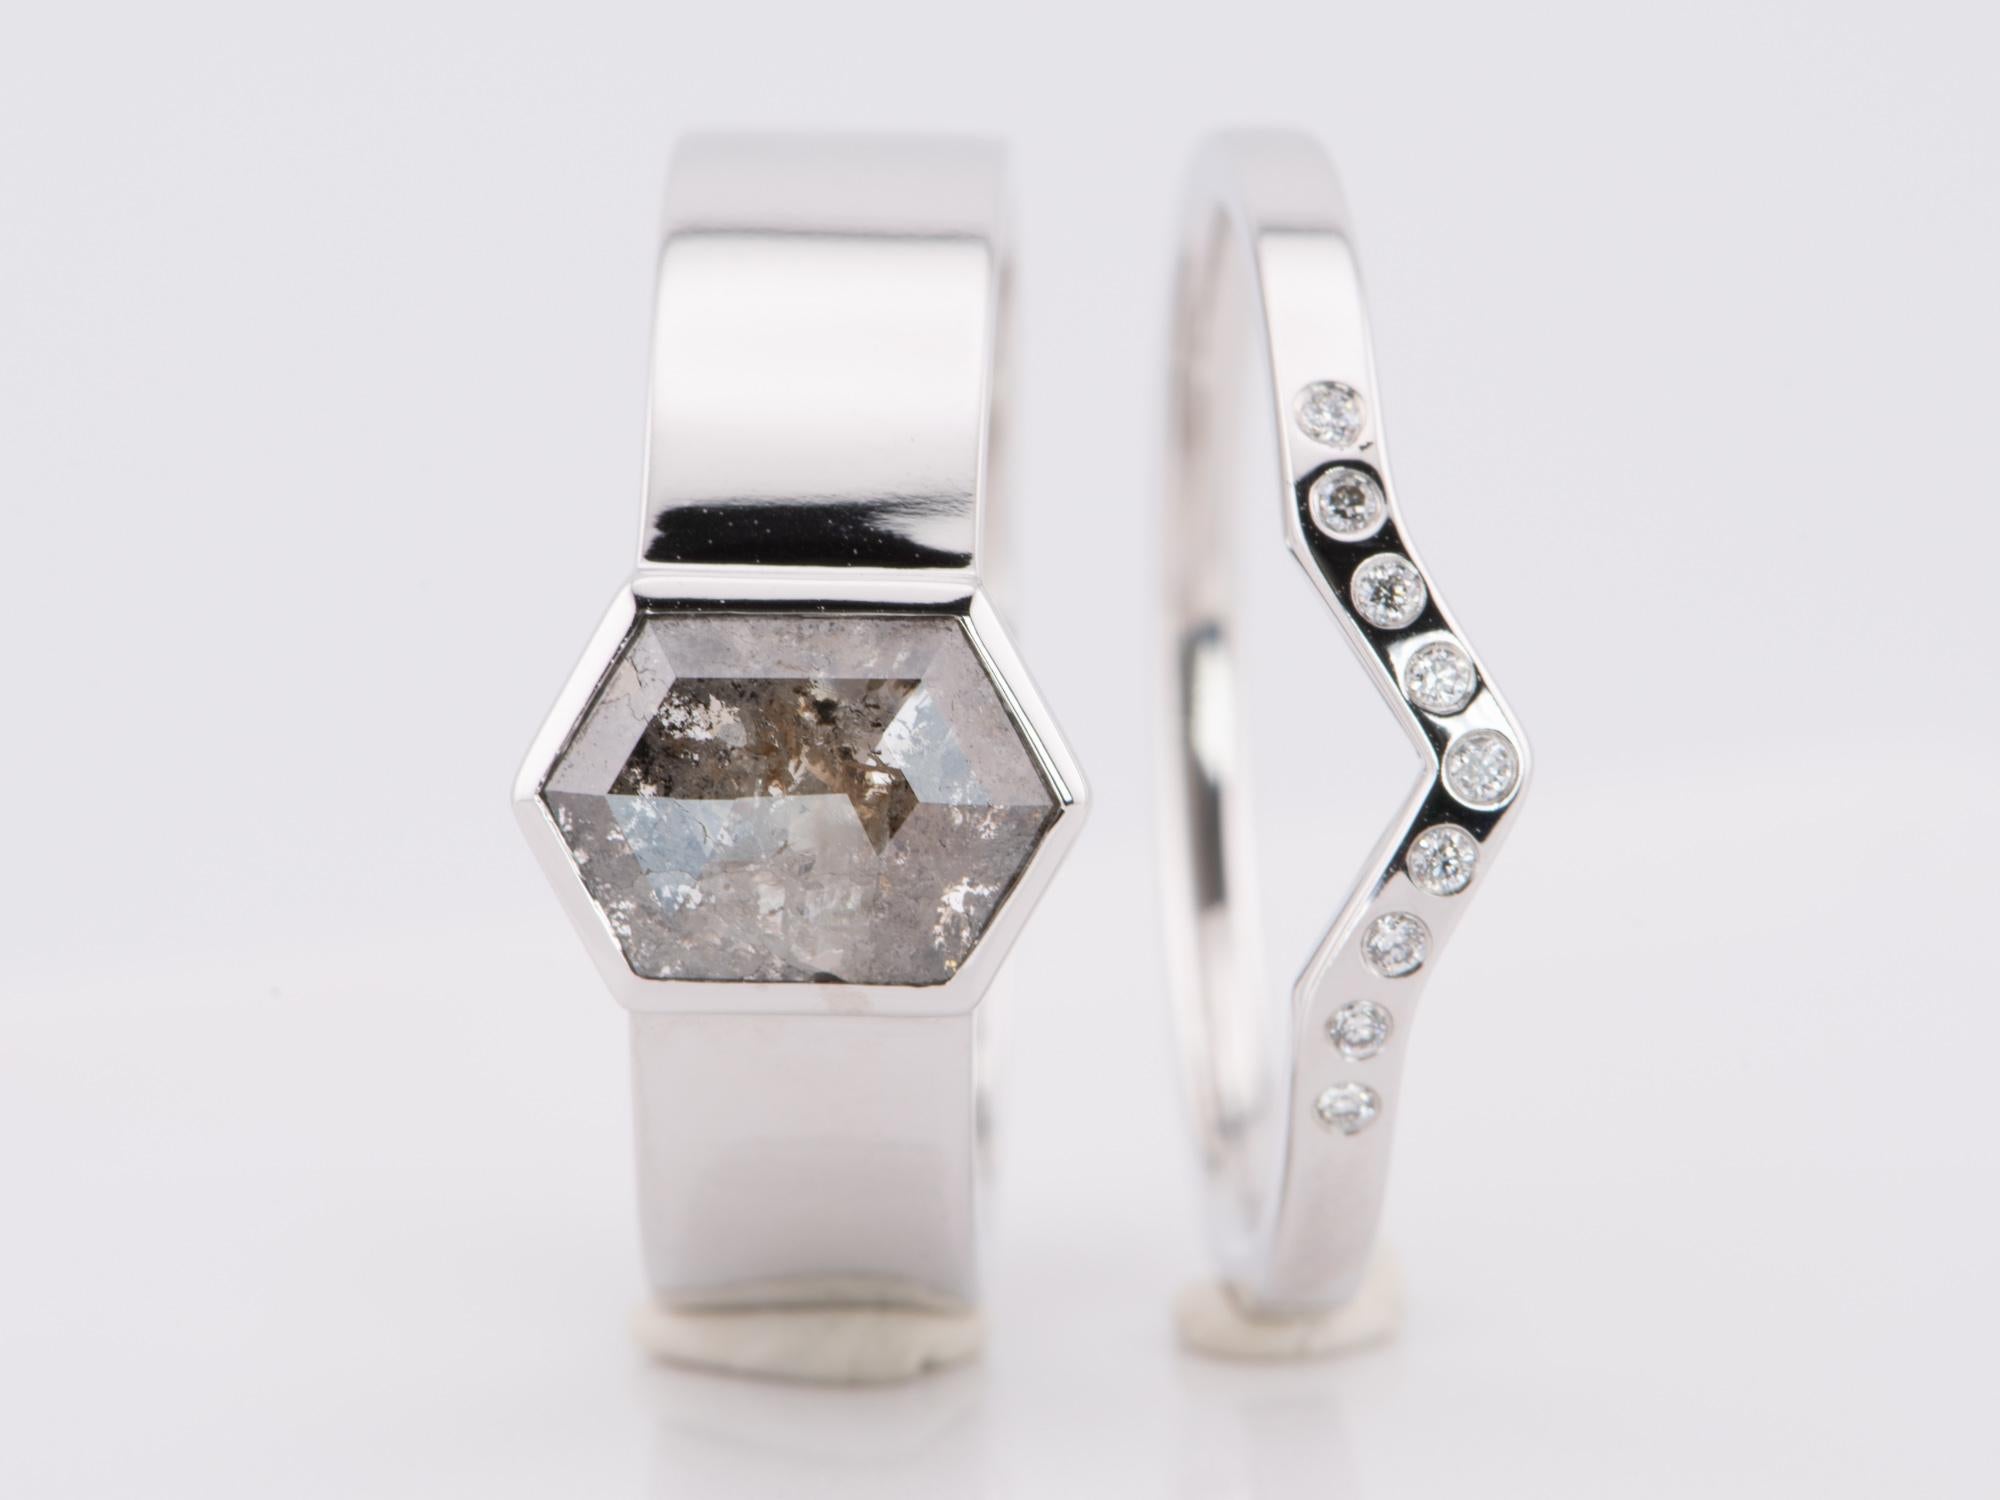 ♥ Solid 14K white gold ring set (2 rings are included in this purchase) with a hexagon salt and pepper diamond in a bezel setting; paired with a matching V-shaped wedding band flush set with brilliant natural diamonds
♥ Modern design, with a